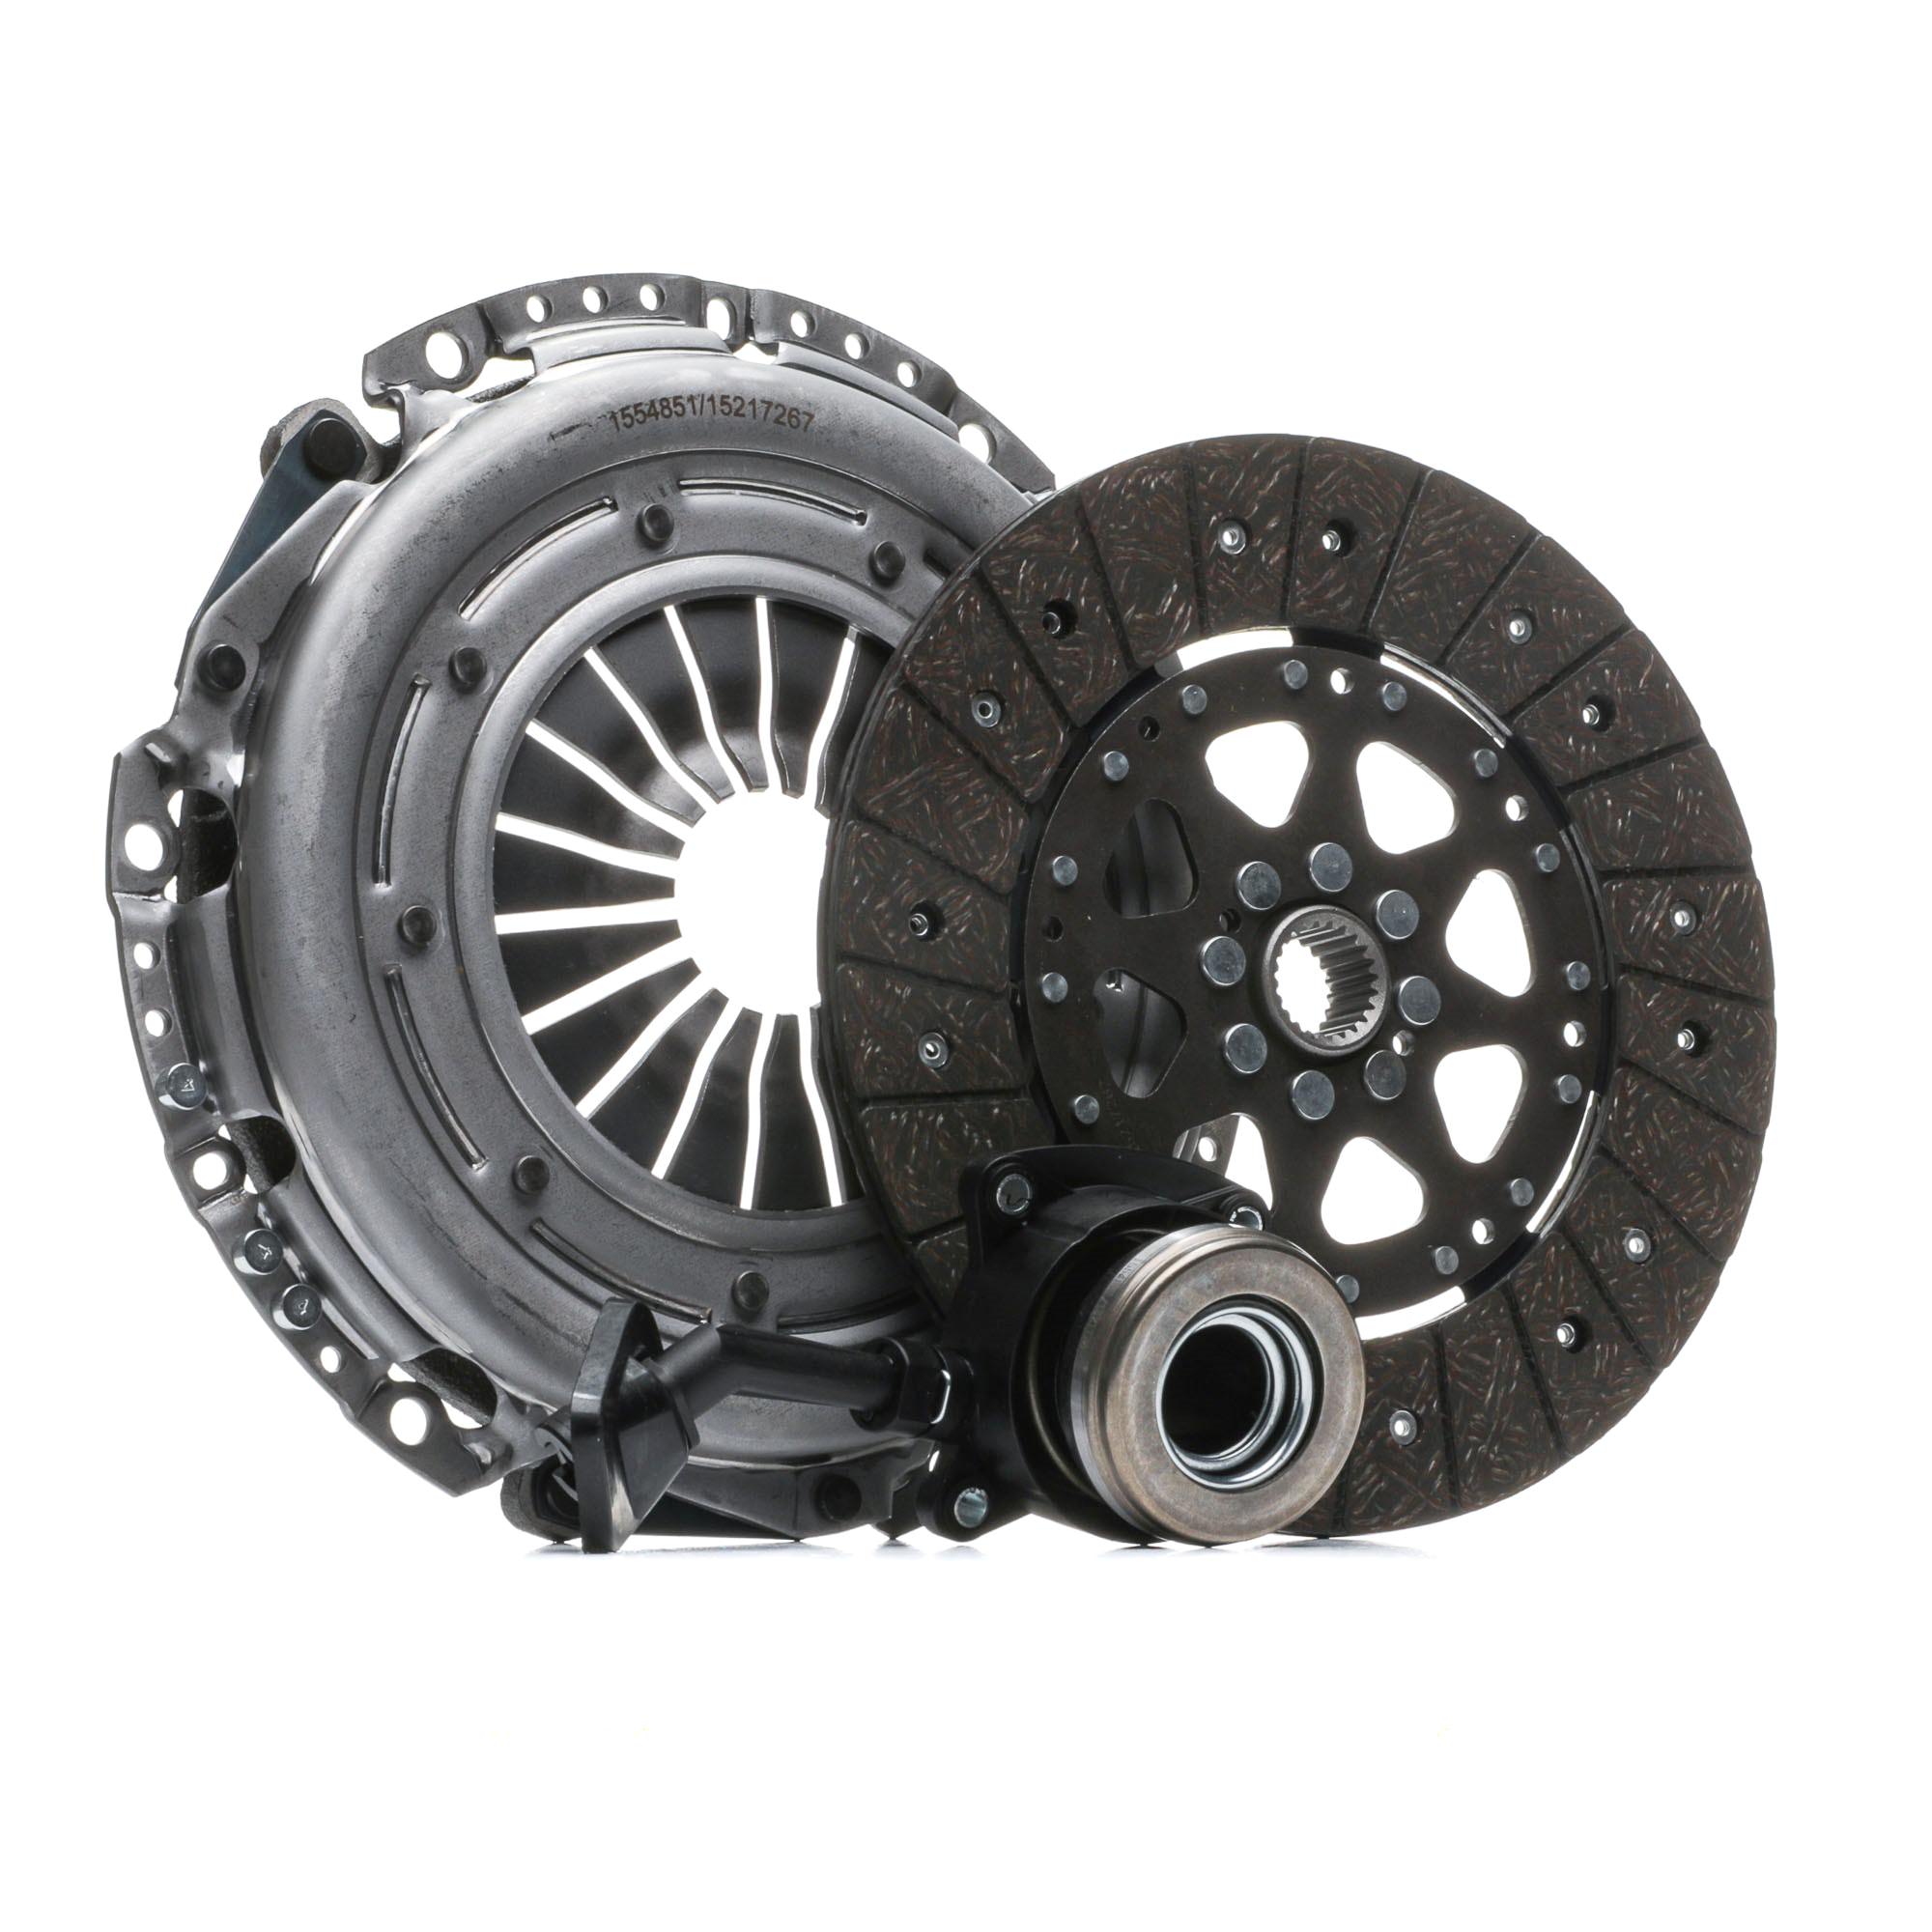 RIDEX 479C0369 Clutch kit for engines with dual-mass flywheel, with central slave cylinder, Requires special tools for mounting, Check and replace dual-mass flywheel if necessary., with automatic adjustment, 240mm